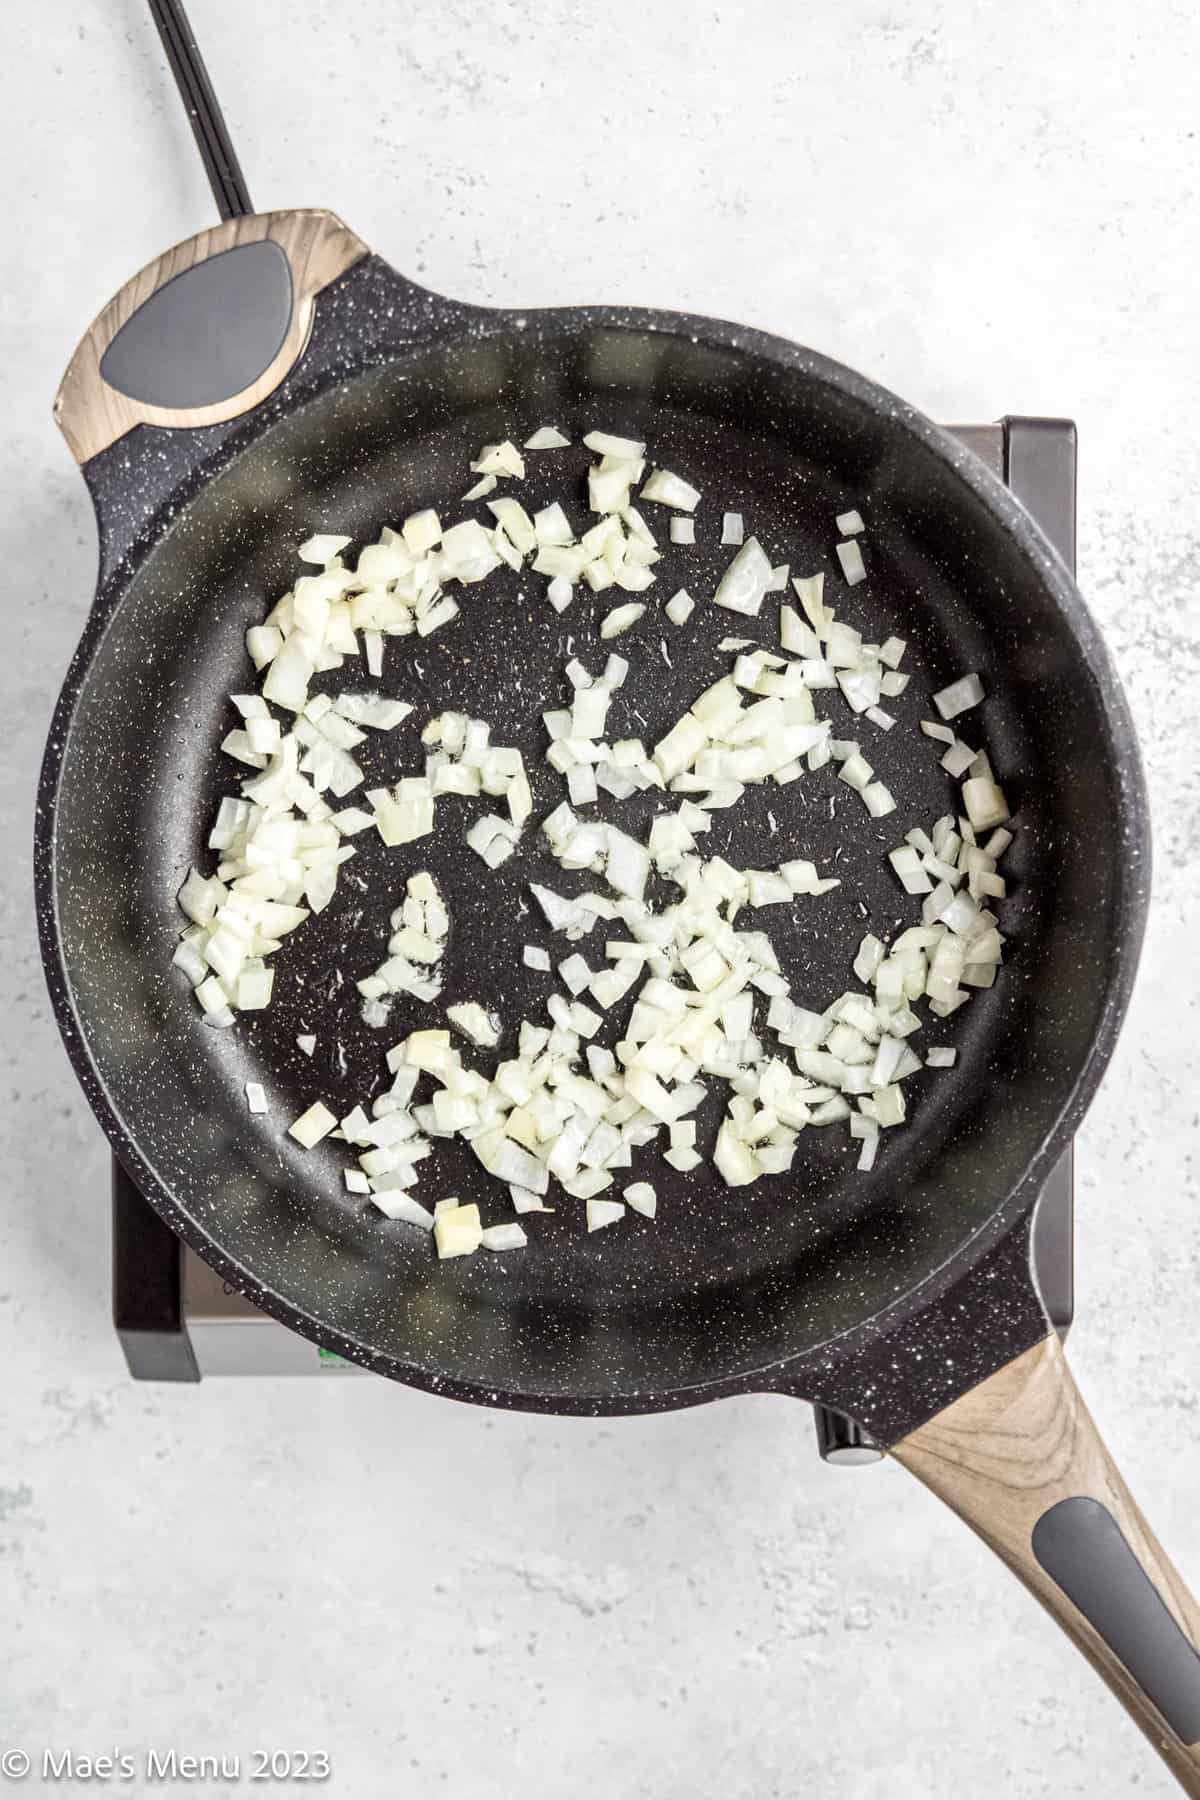 Sauteing onions on a skillet.